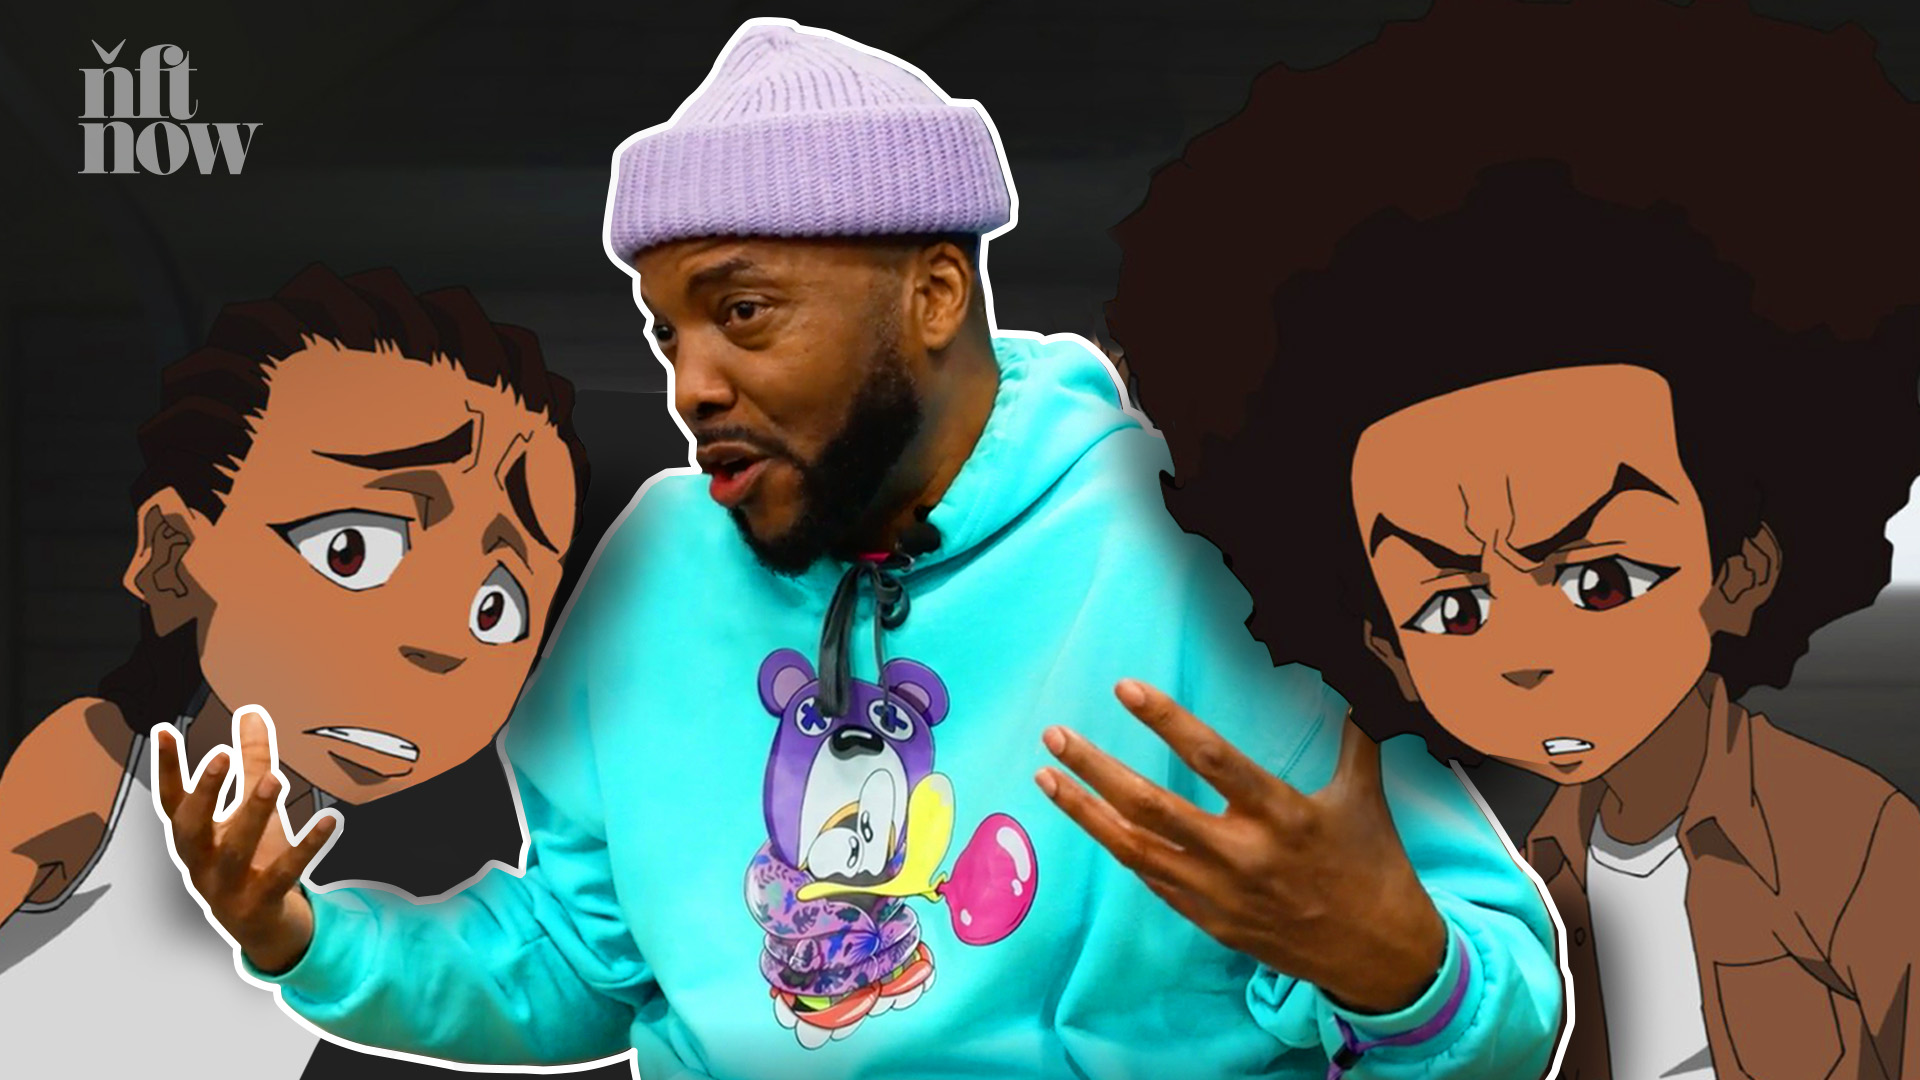 WATCH: Why The Boondocks Producer’s Next Move Is NFTs